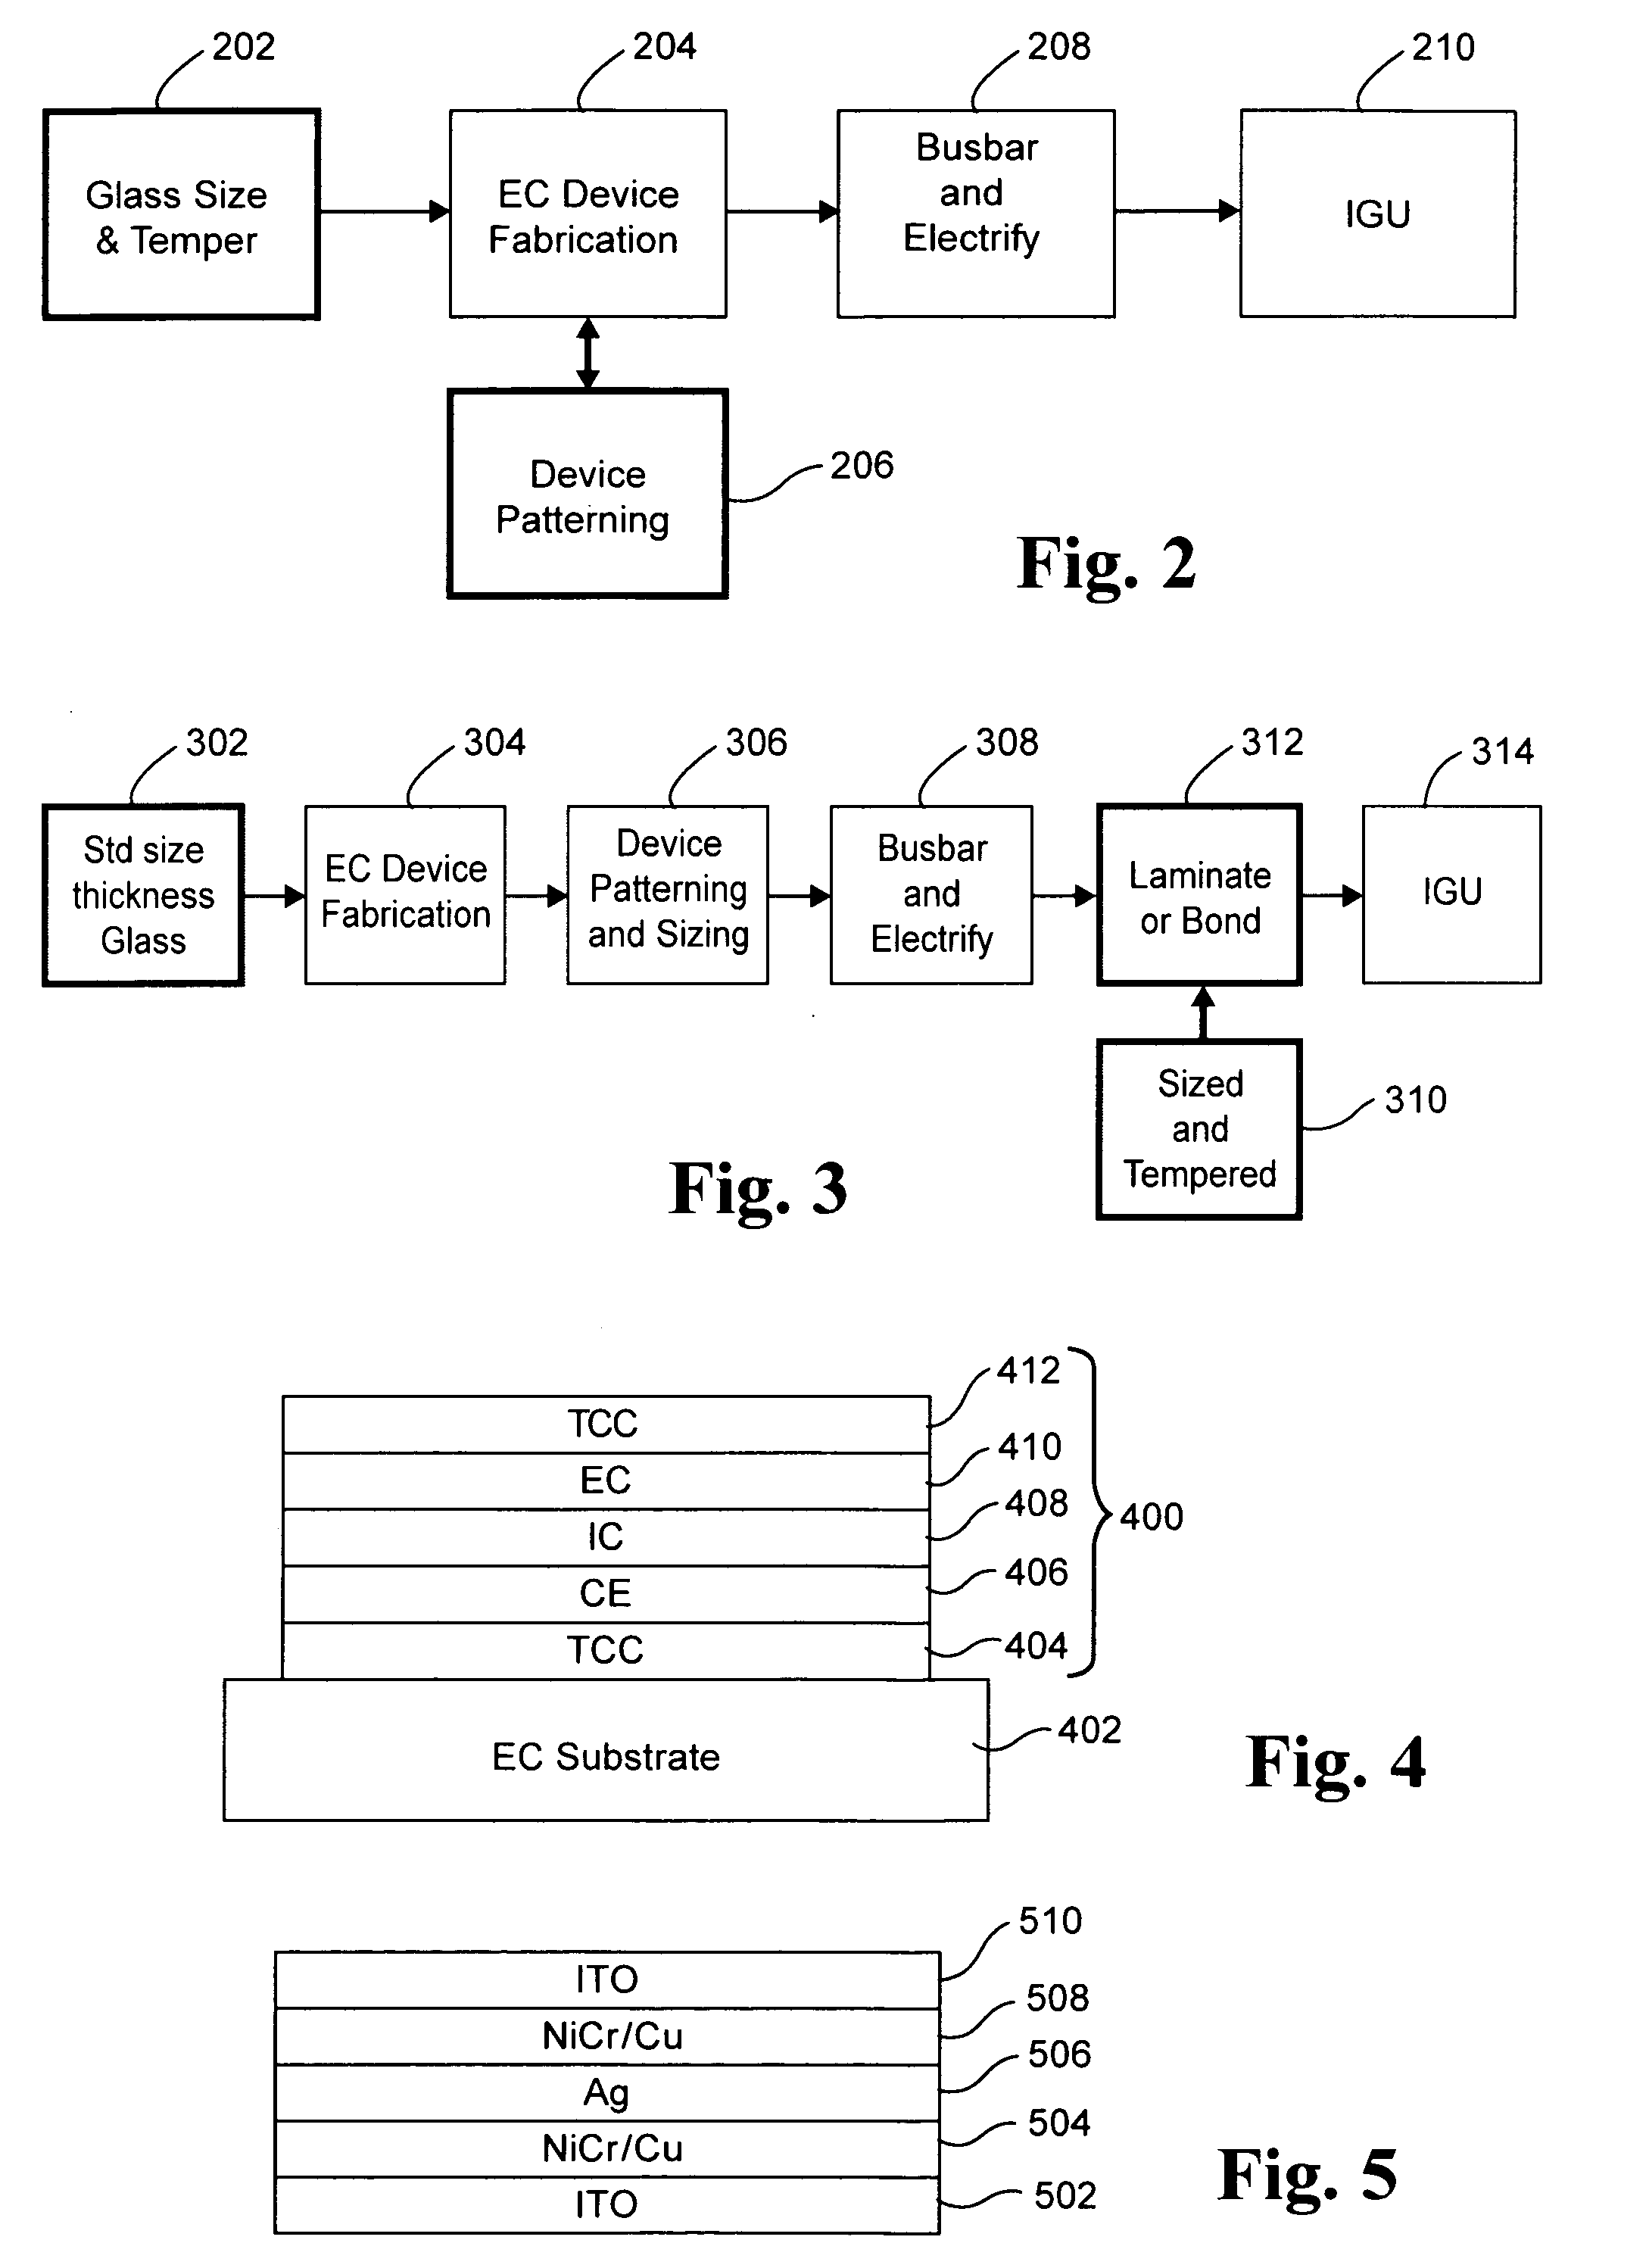 Electrochromic devices, assemblies incorporating electrochromic devices, and/or methods of making the same